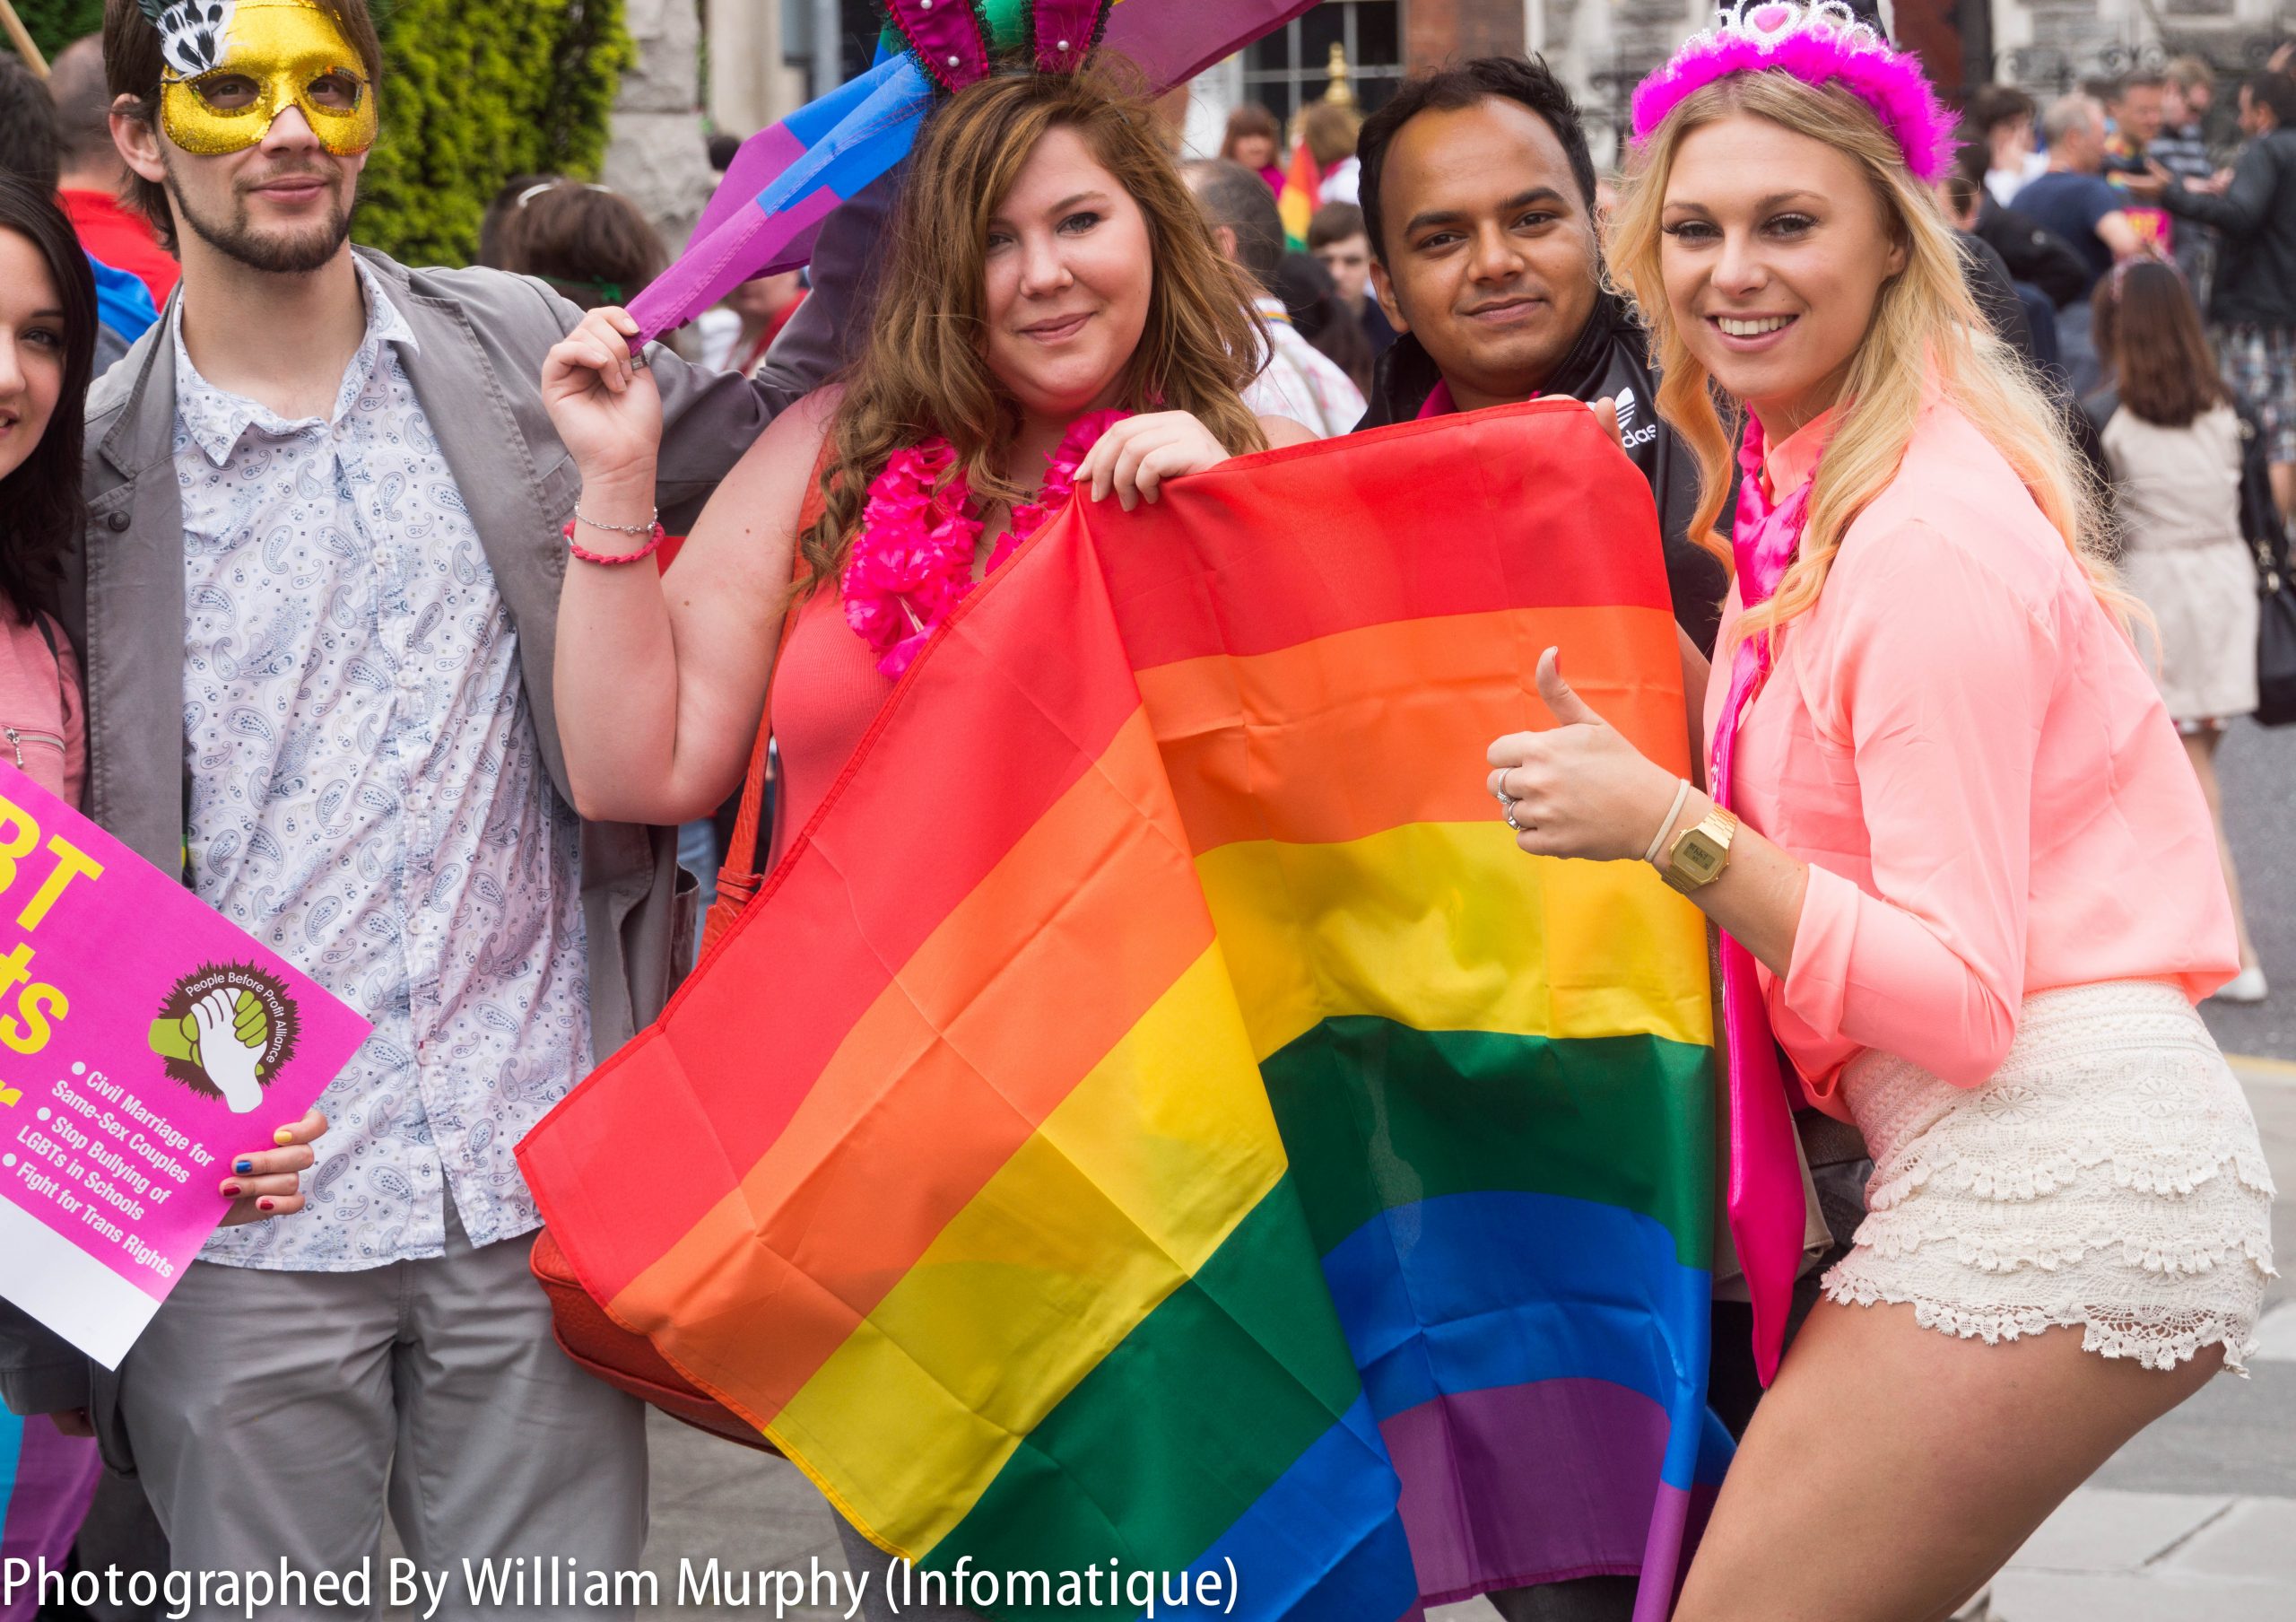 Photo showing a group of four people celebrating Pride Festival for the LGBTQ Population